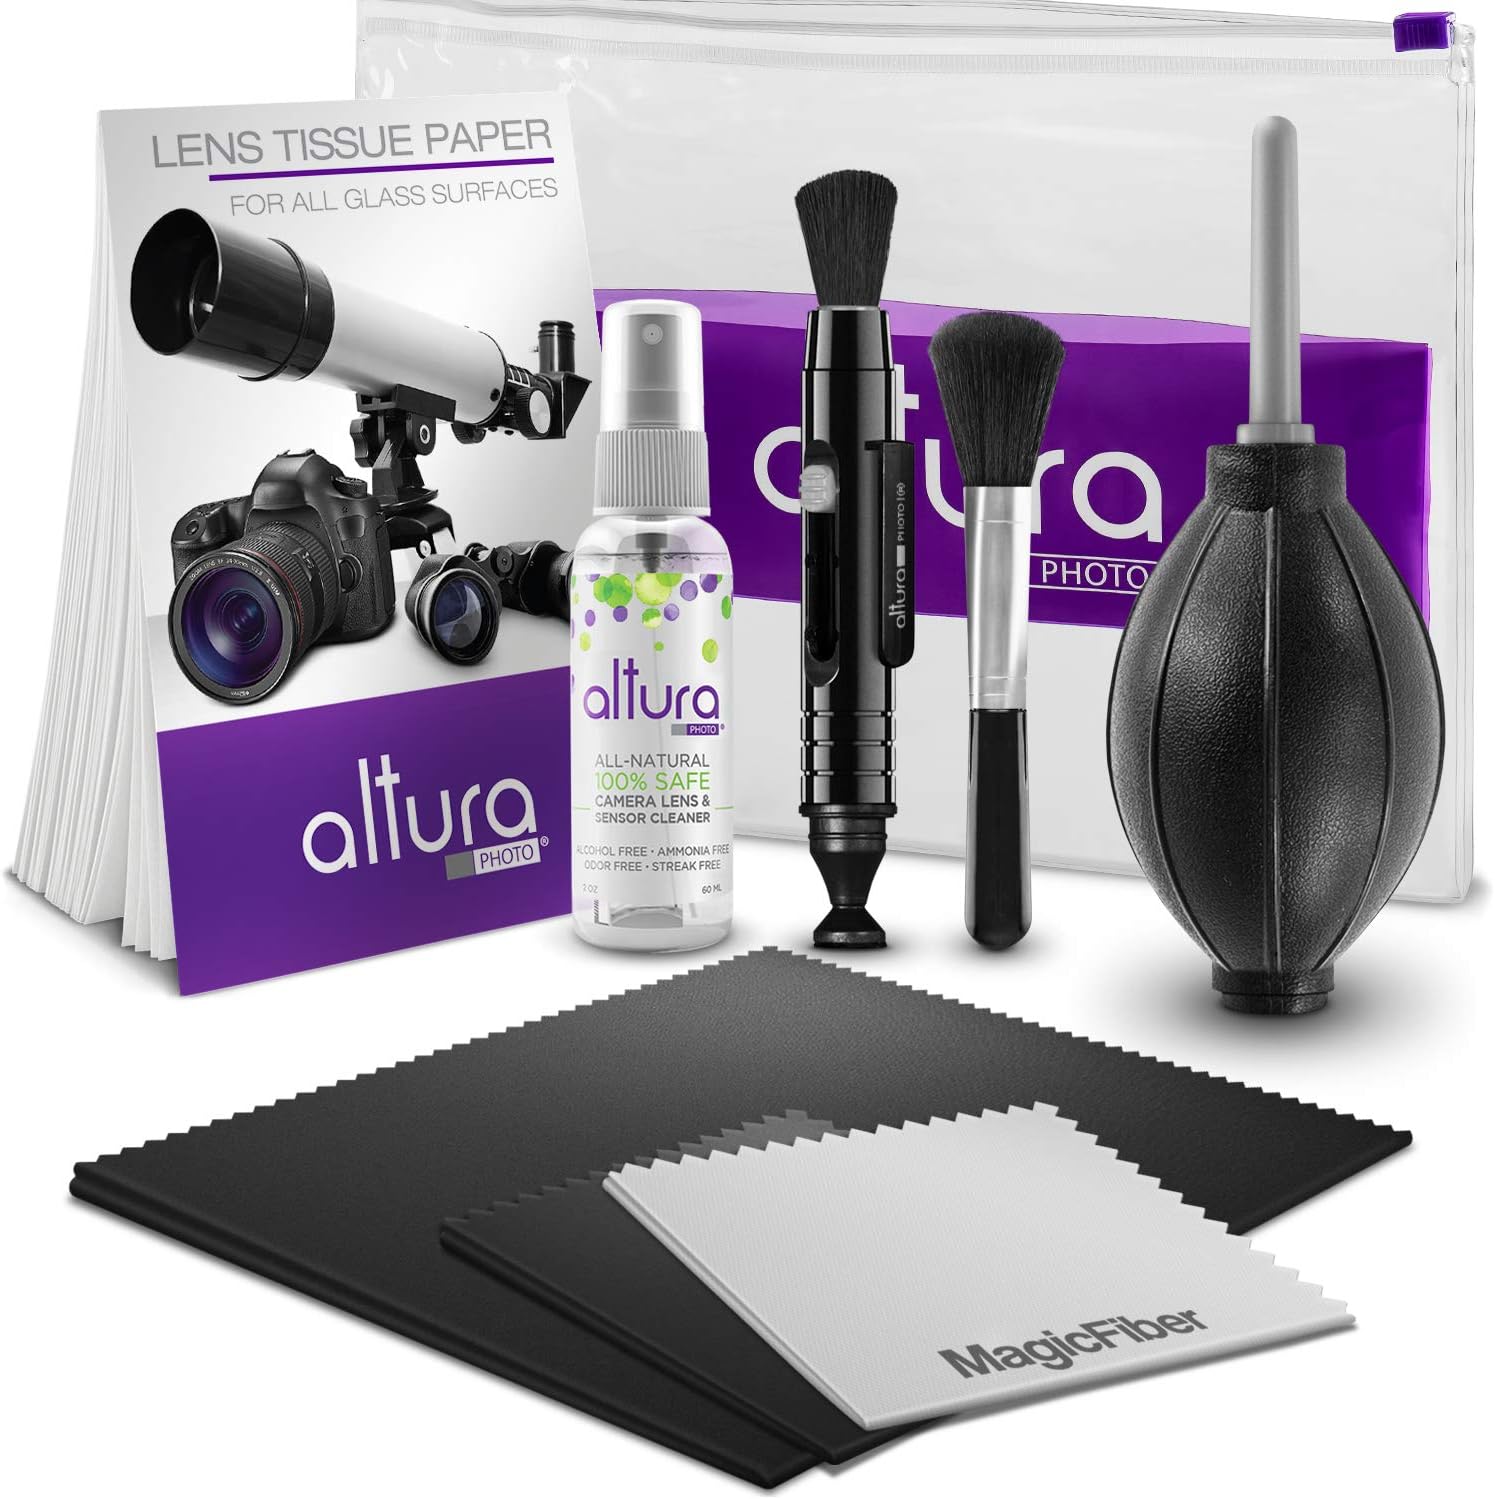 Rating: Altura Photo Professional Cleaning Kit for DSLR Cameras and Sensitive Electronics Bundle with 2oz Altura Photo Spray Lens and LCD Cleaner